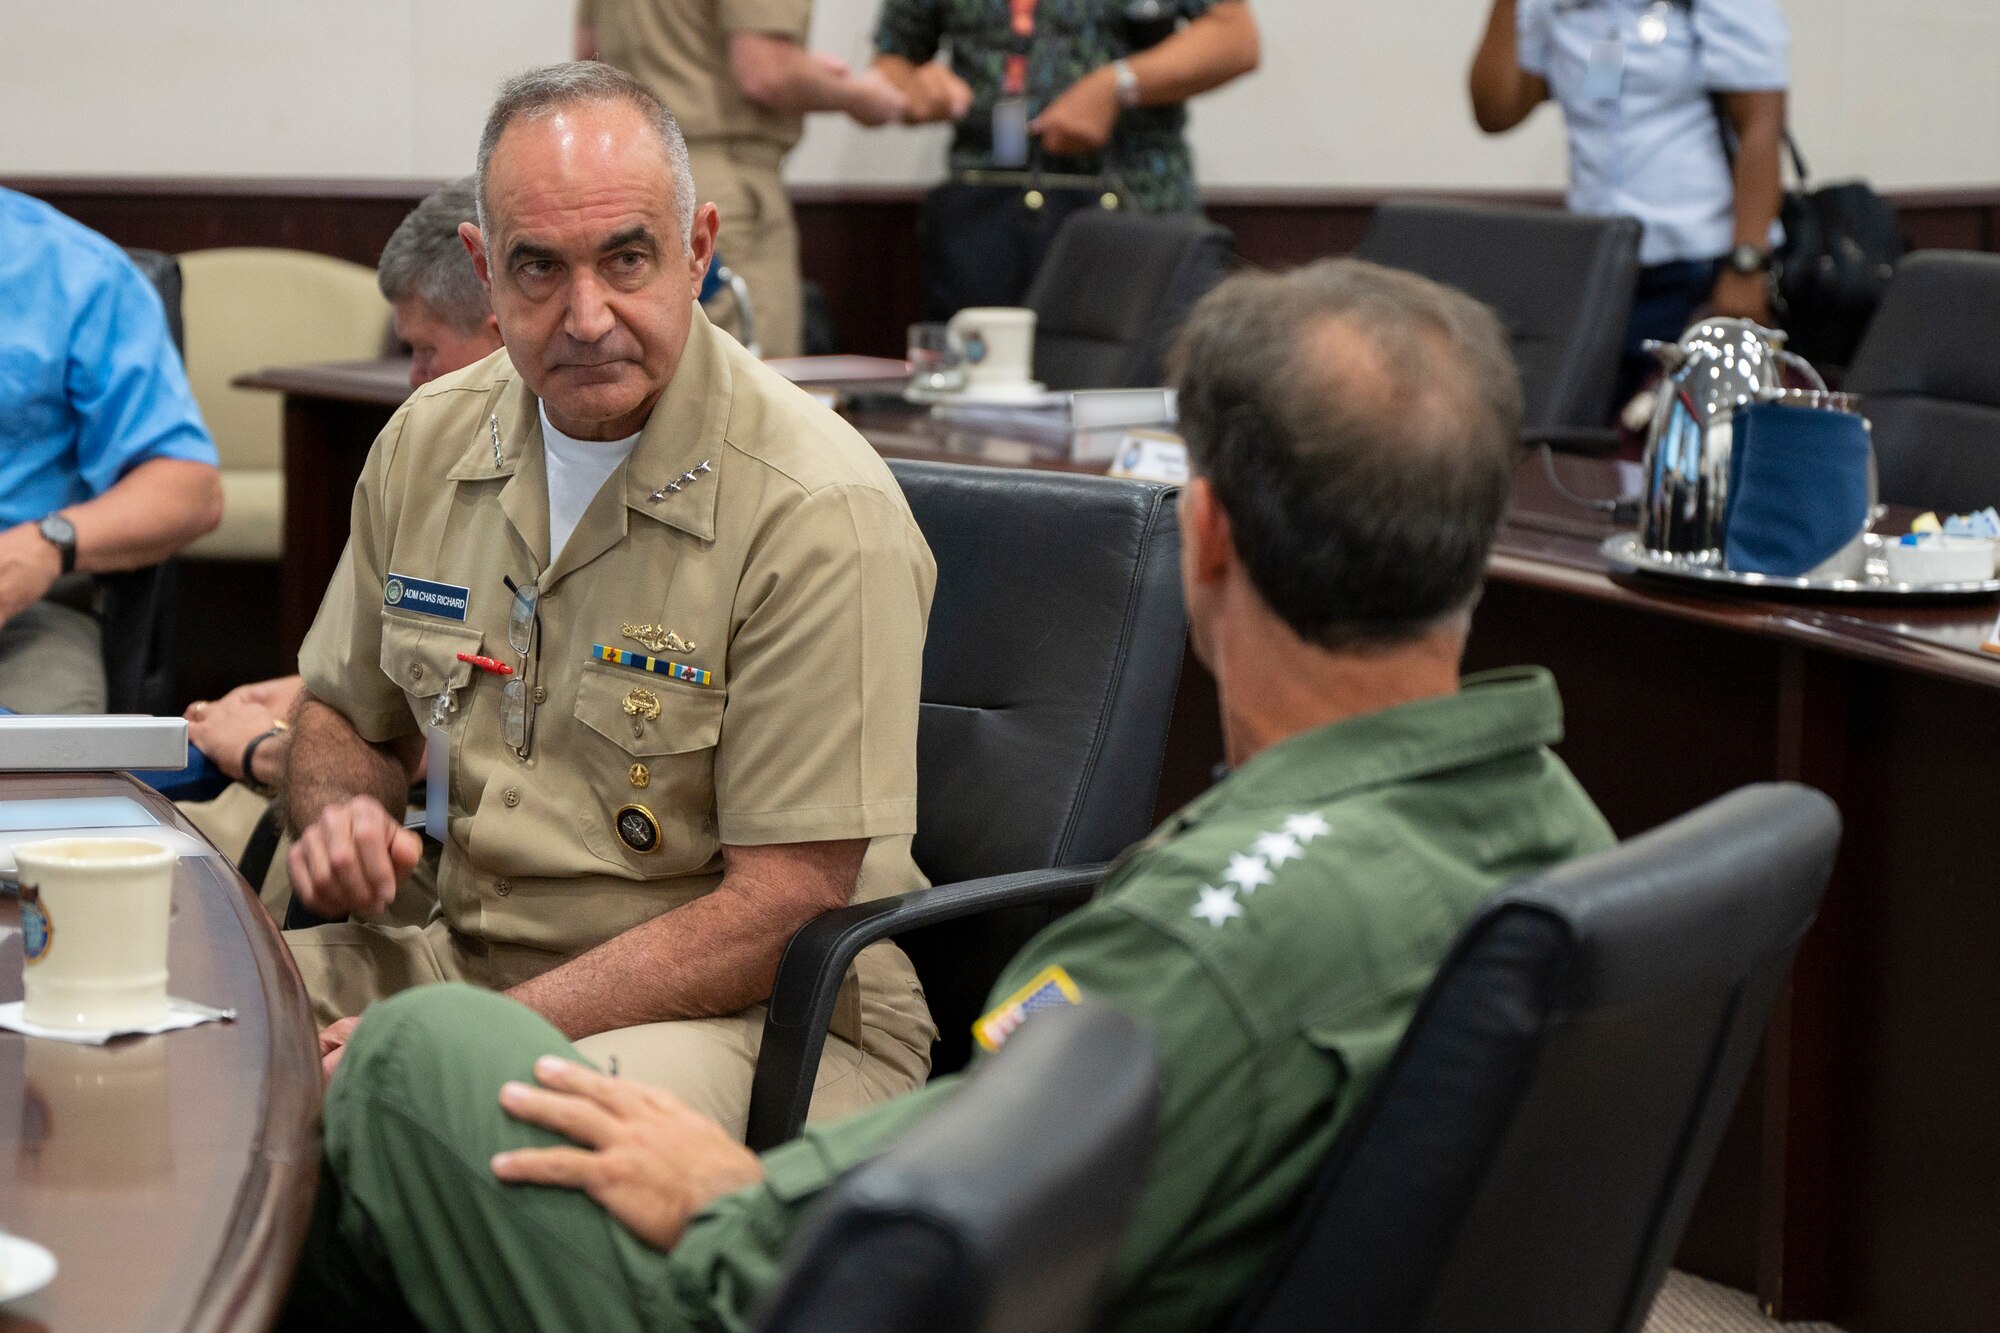 Adm. Richard visits with Adm. John Aquilino, U.S. Indo-Pacific Command commander. The leaders discussed key security issues and areas of integration required to address cross-domain regional challenges and global threats.